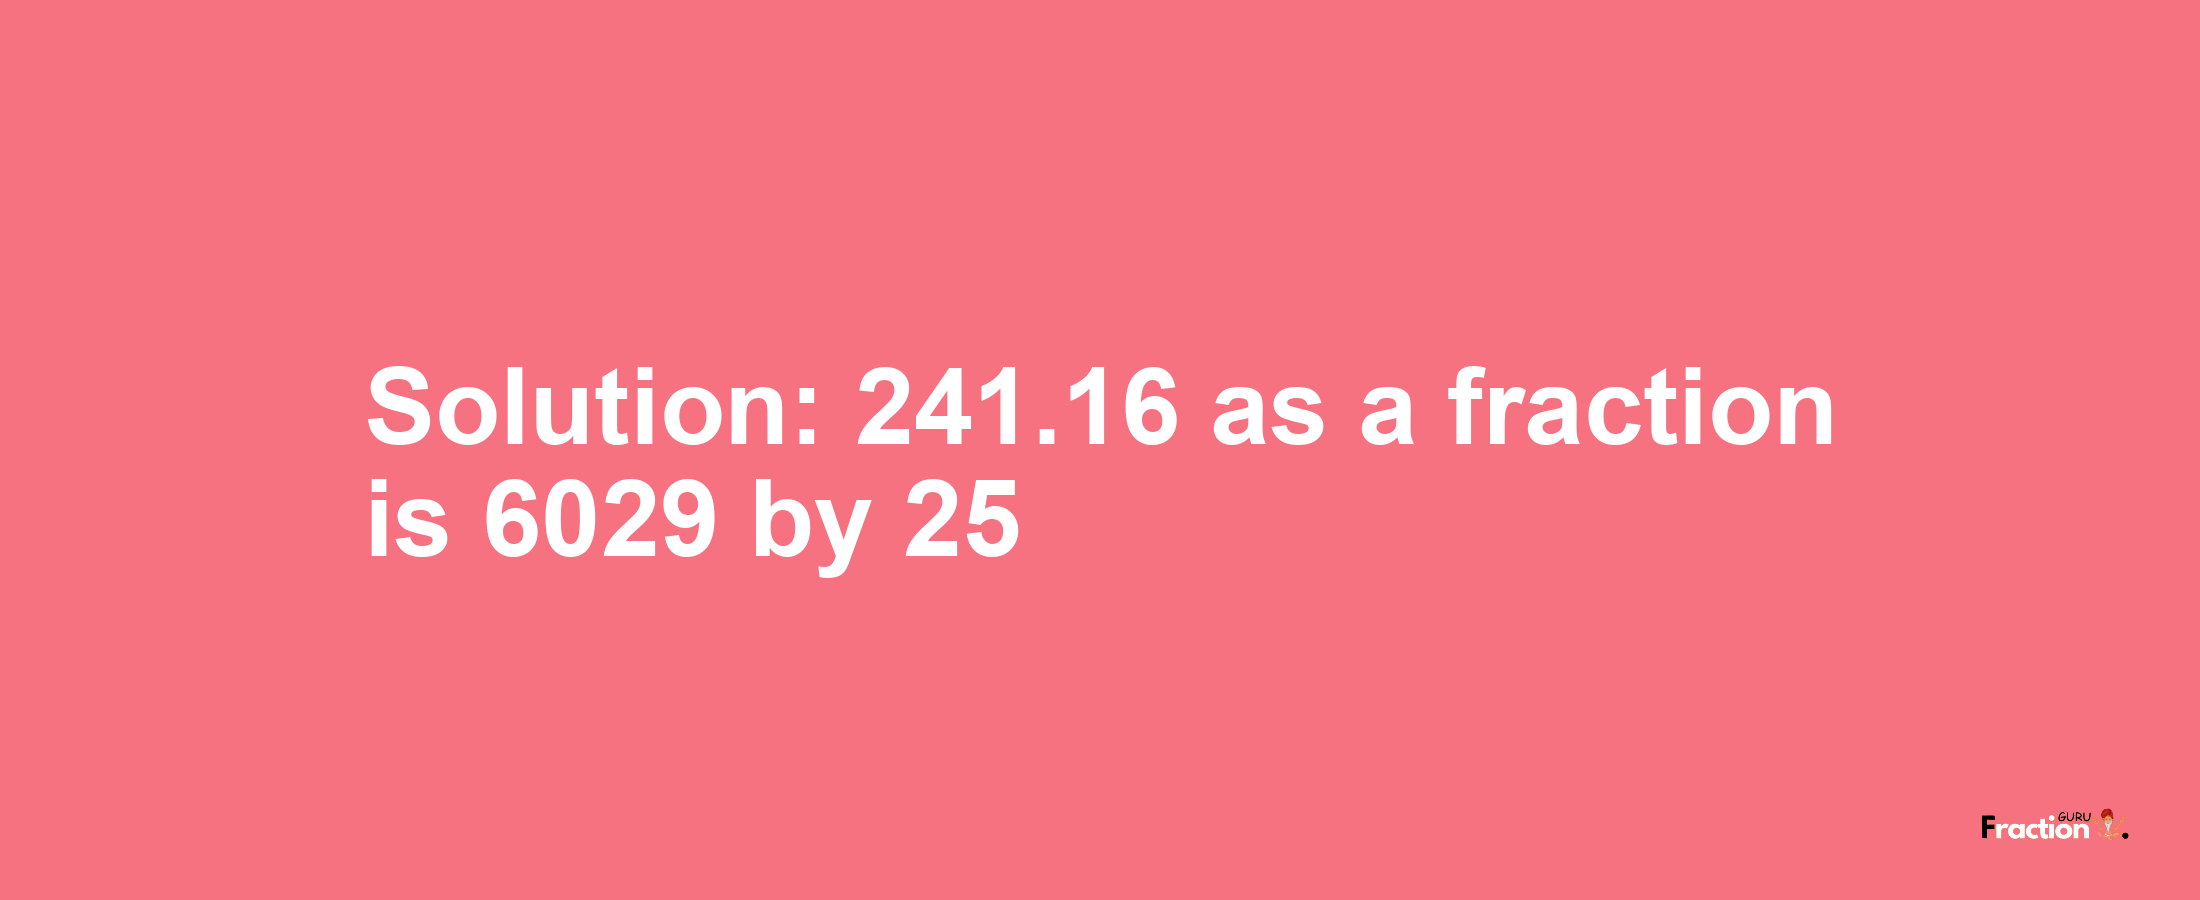 Solution:241.16 as a fraction is 6029/25